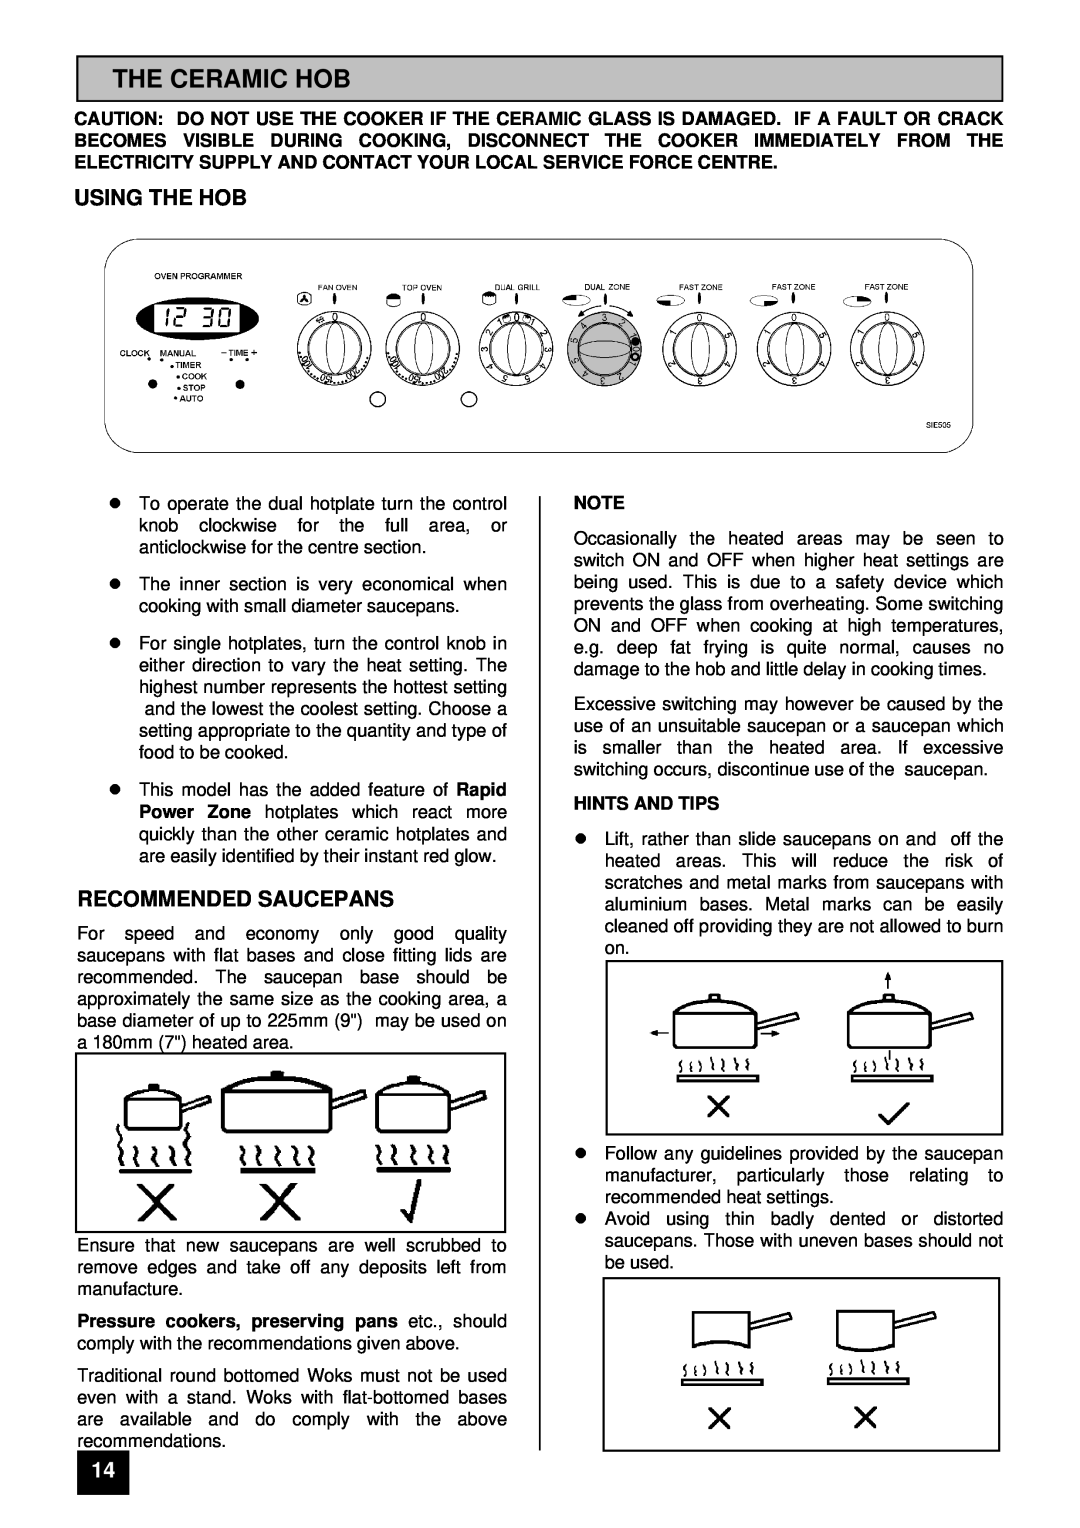 Tricity Bendix SIE 505 installation instructions The Ceramic Hob, Using The Hob, Recommended Saucepans, lHINTS AND TIPS 